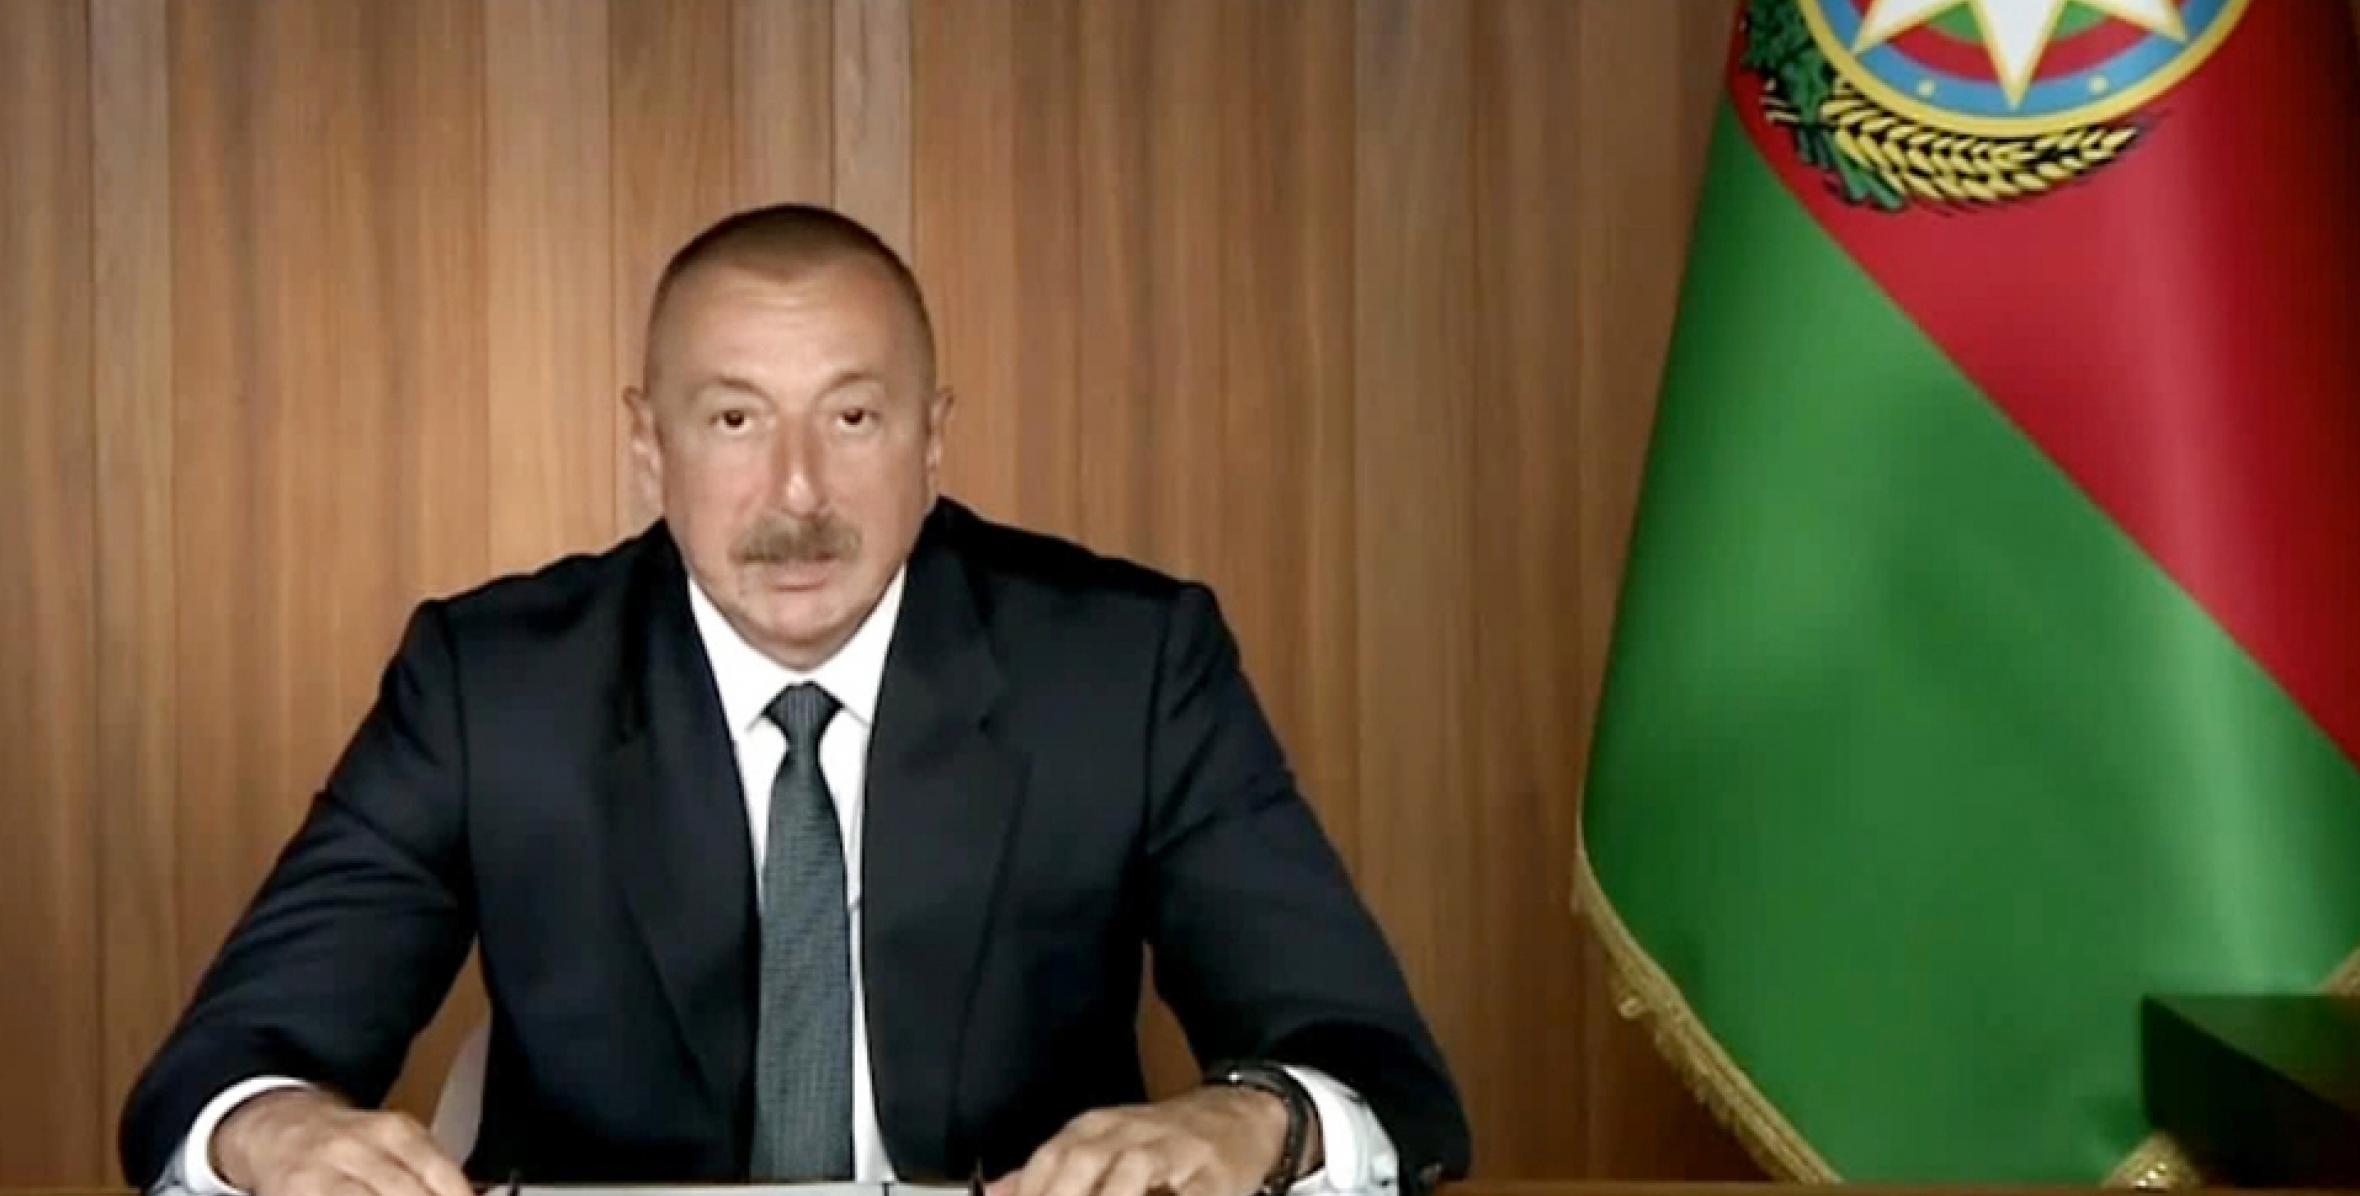 Speech by Ilham Aliyev at the general debates of 75th session of United Nations General Assembly